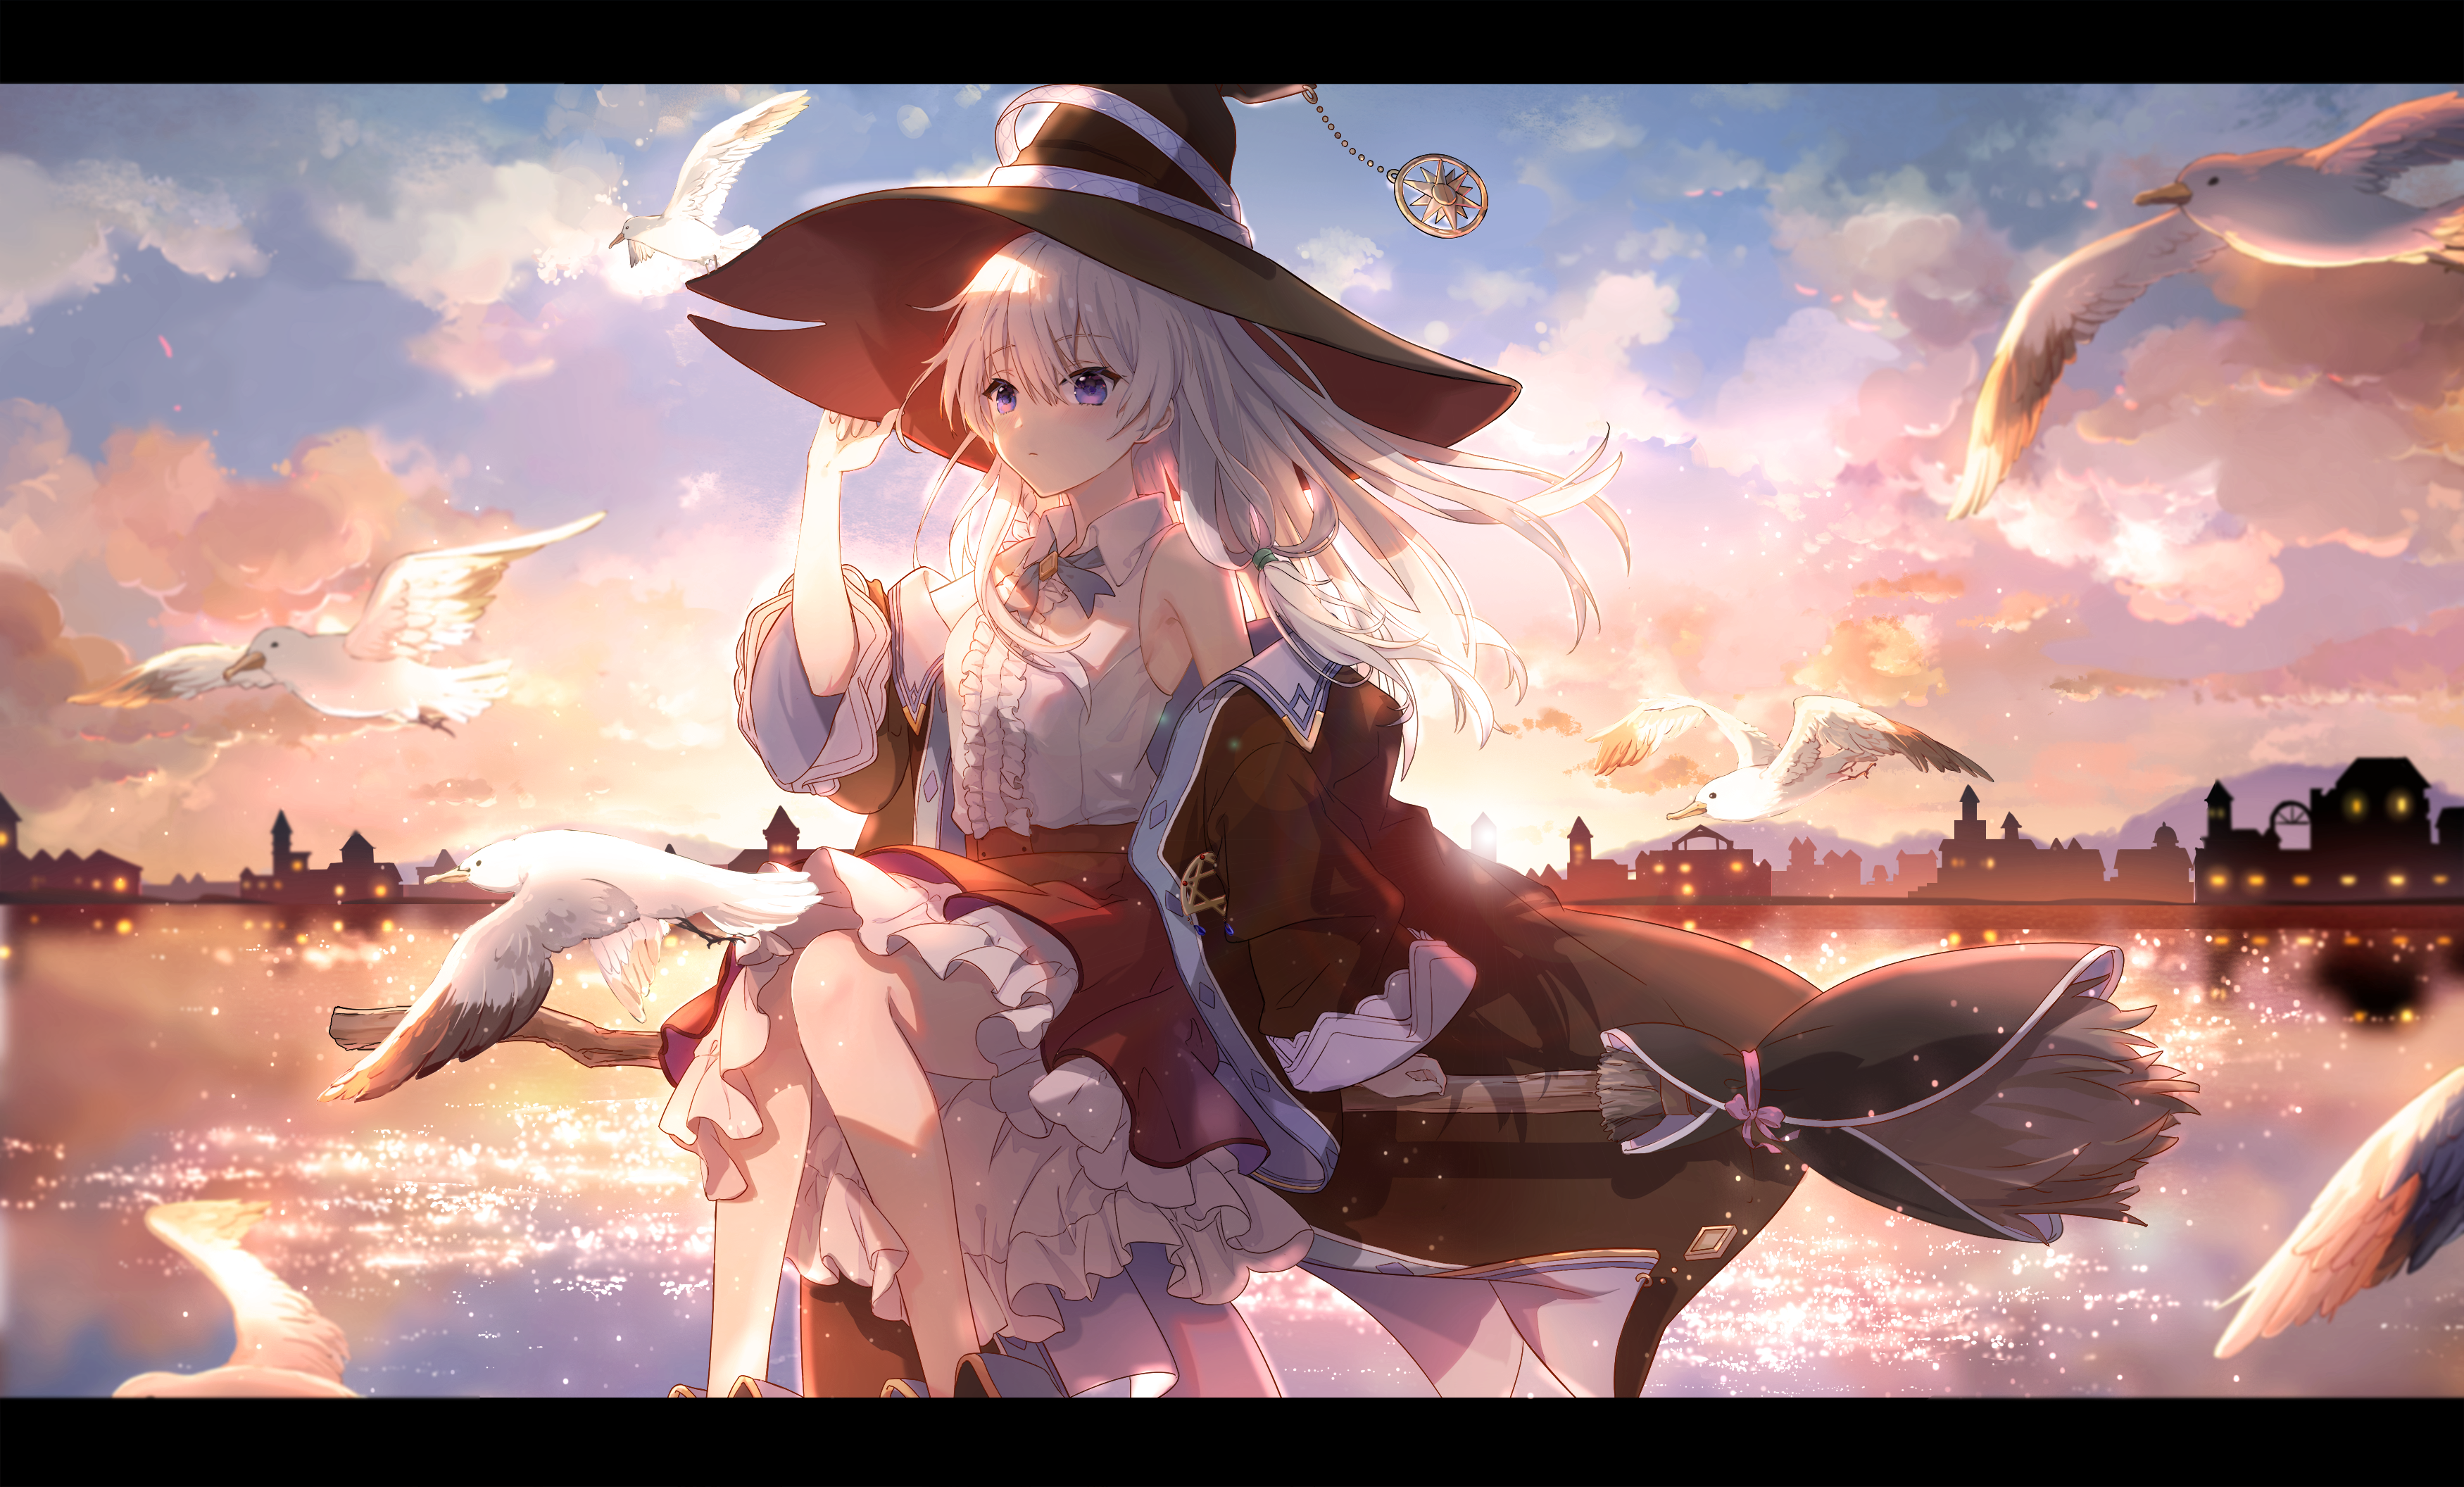 Live Wallpaper anime girls witch elaina petals sweet little witch the  journey of elaina nice girl anime arts smile  1920x1080  Rare Gallery  HD Live Wallpapers